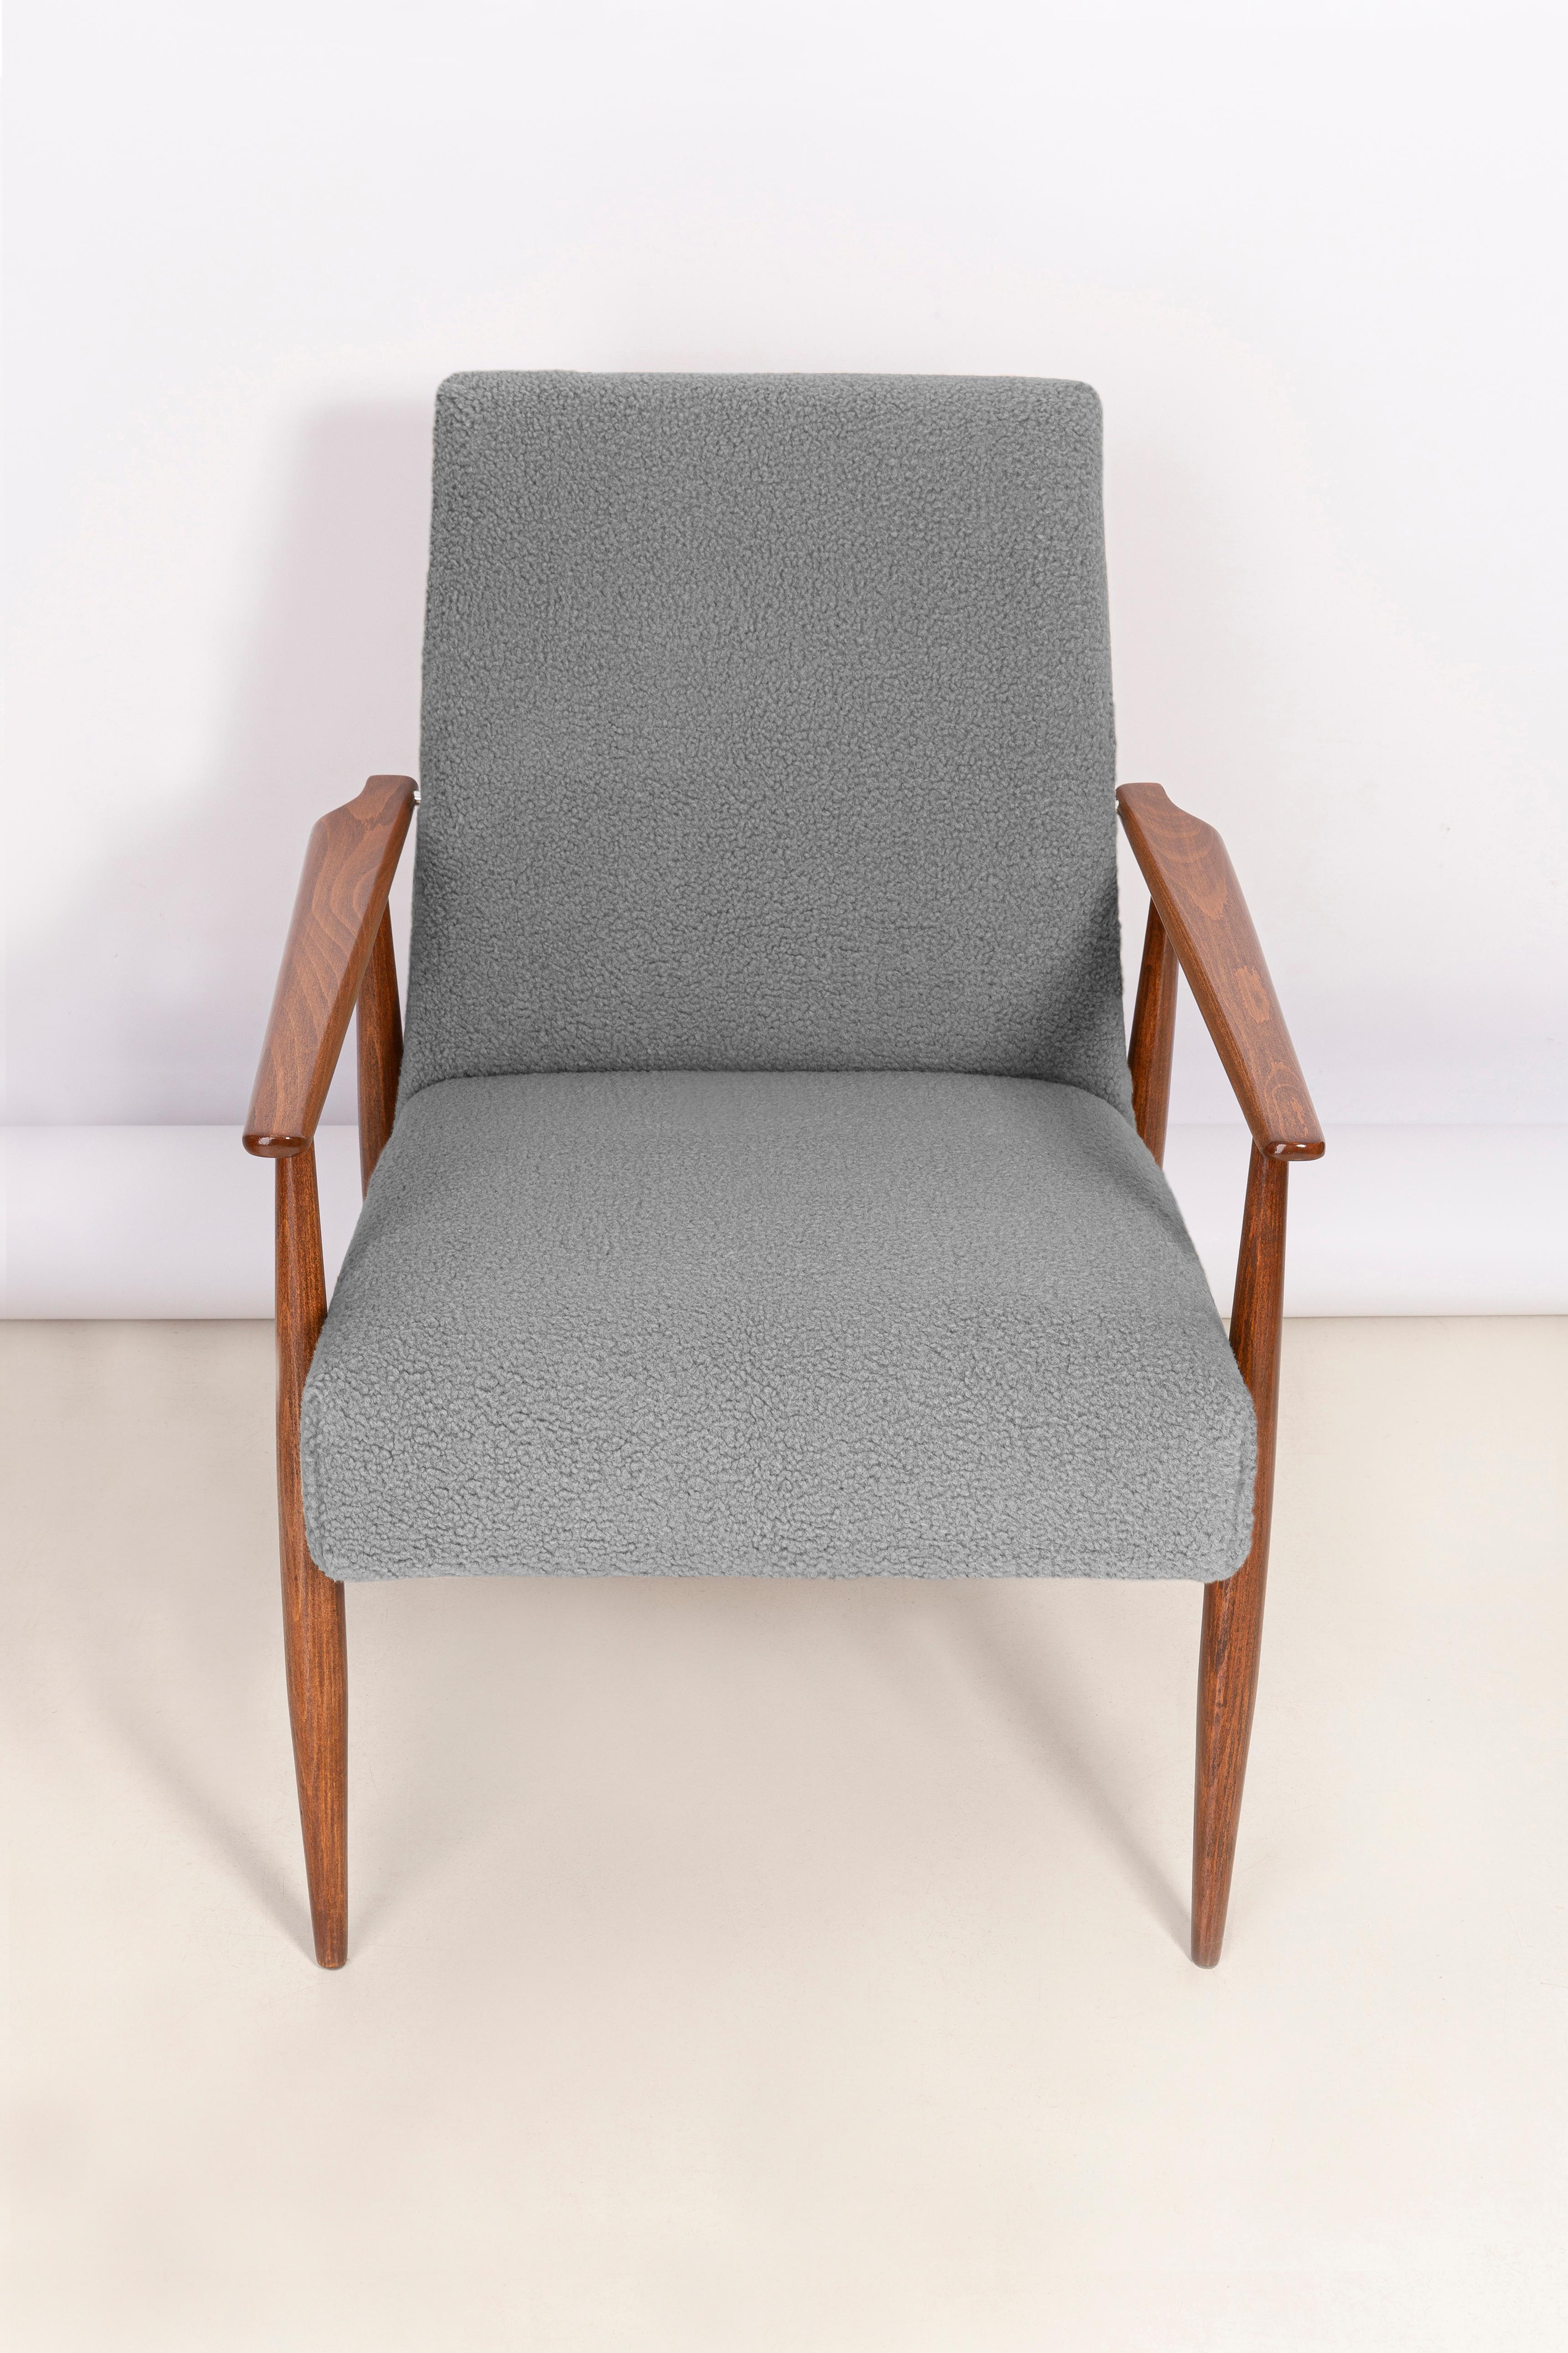 Beautiful mid century gray bouclé armchair, designed by Henryk Lis. Produced in Poland in 1960s. One of the best design from this time. Furniture after full professional carpentry and upholstery renovation. The armchair will be perfect in Minimalist